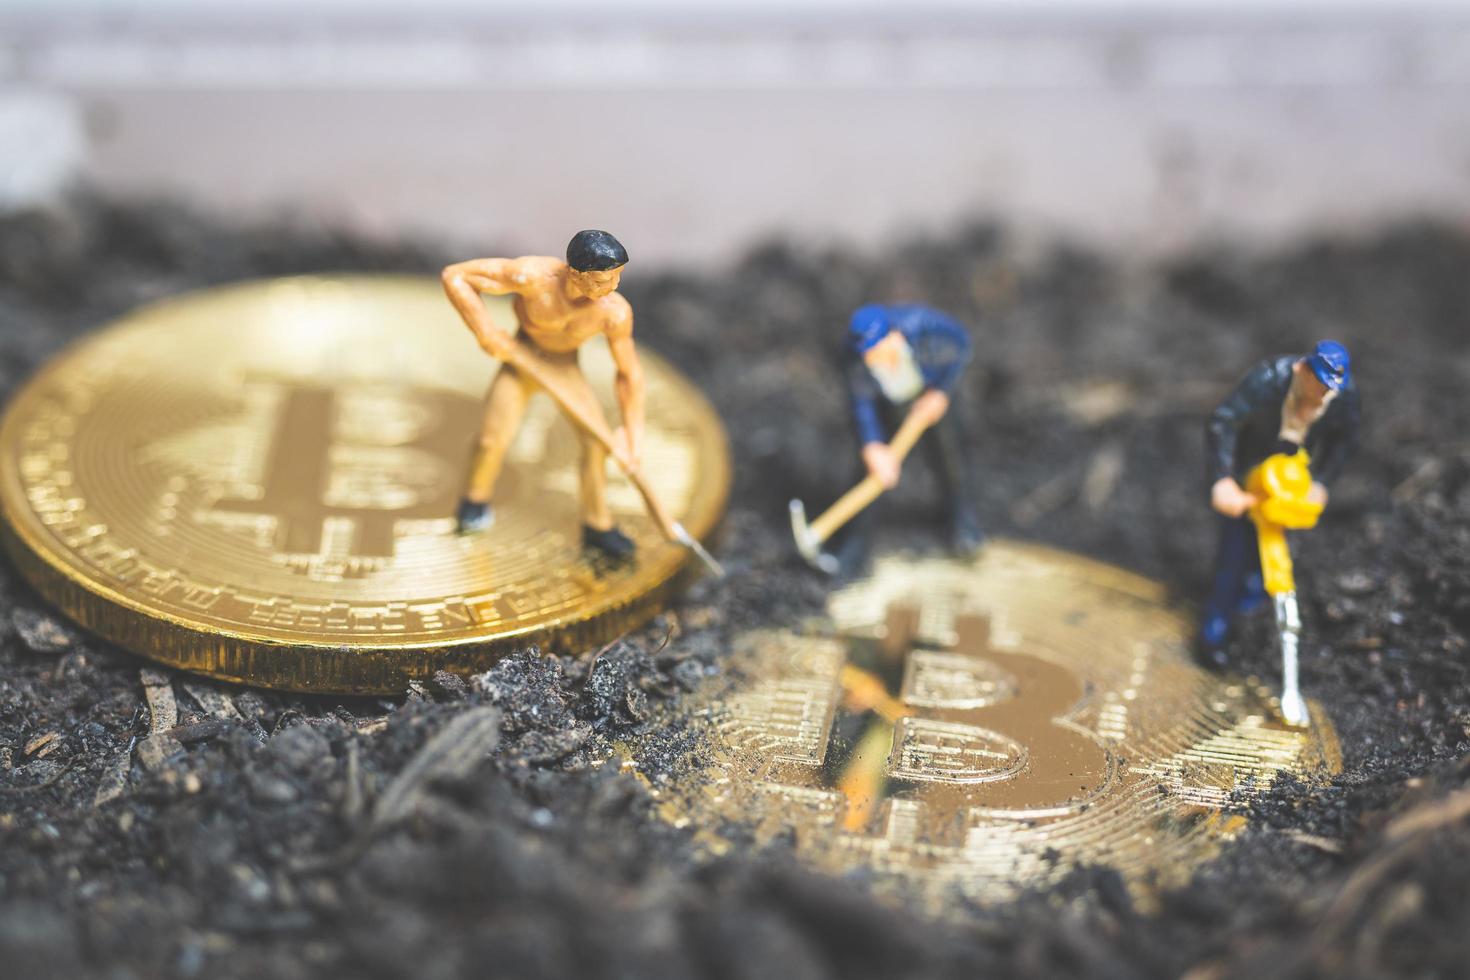 Miniature workers digging the ground to uncover shiny Bitcoin cryptocurrency, successful work concept photo